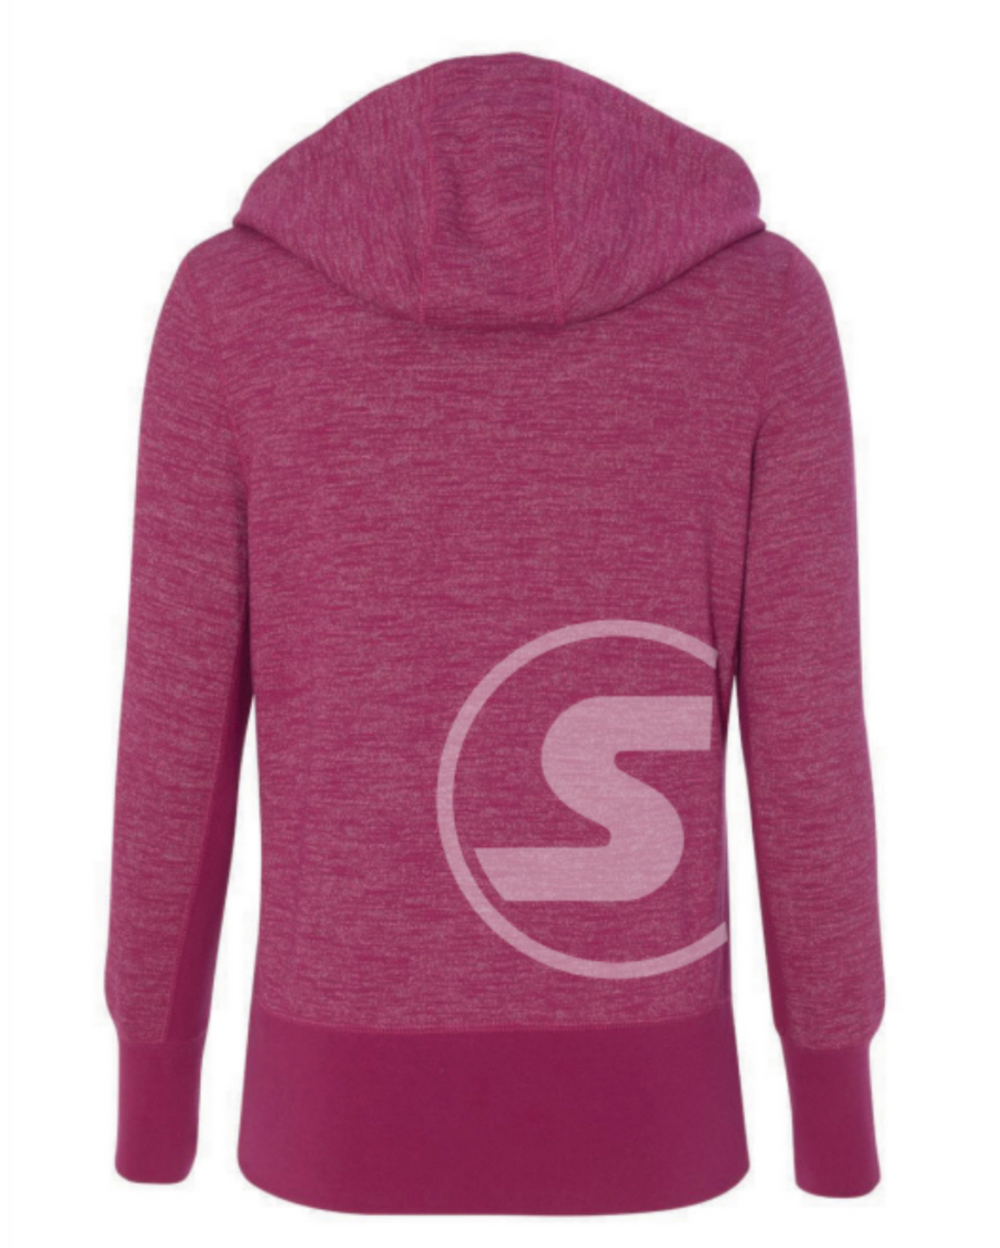 WOMEN'S SOUTH OF THE BORDER ZIP-UP HOODIE IN BRILLIANTE ROSA